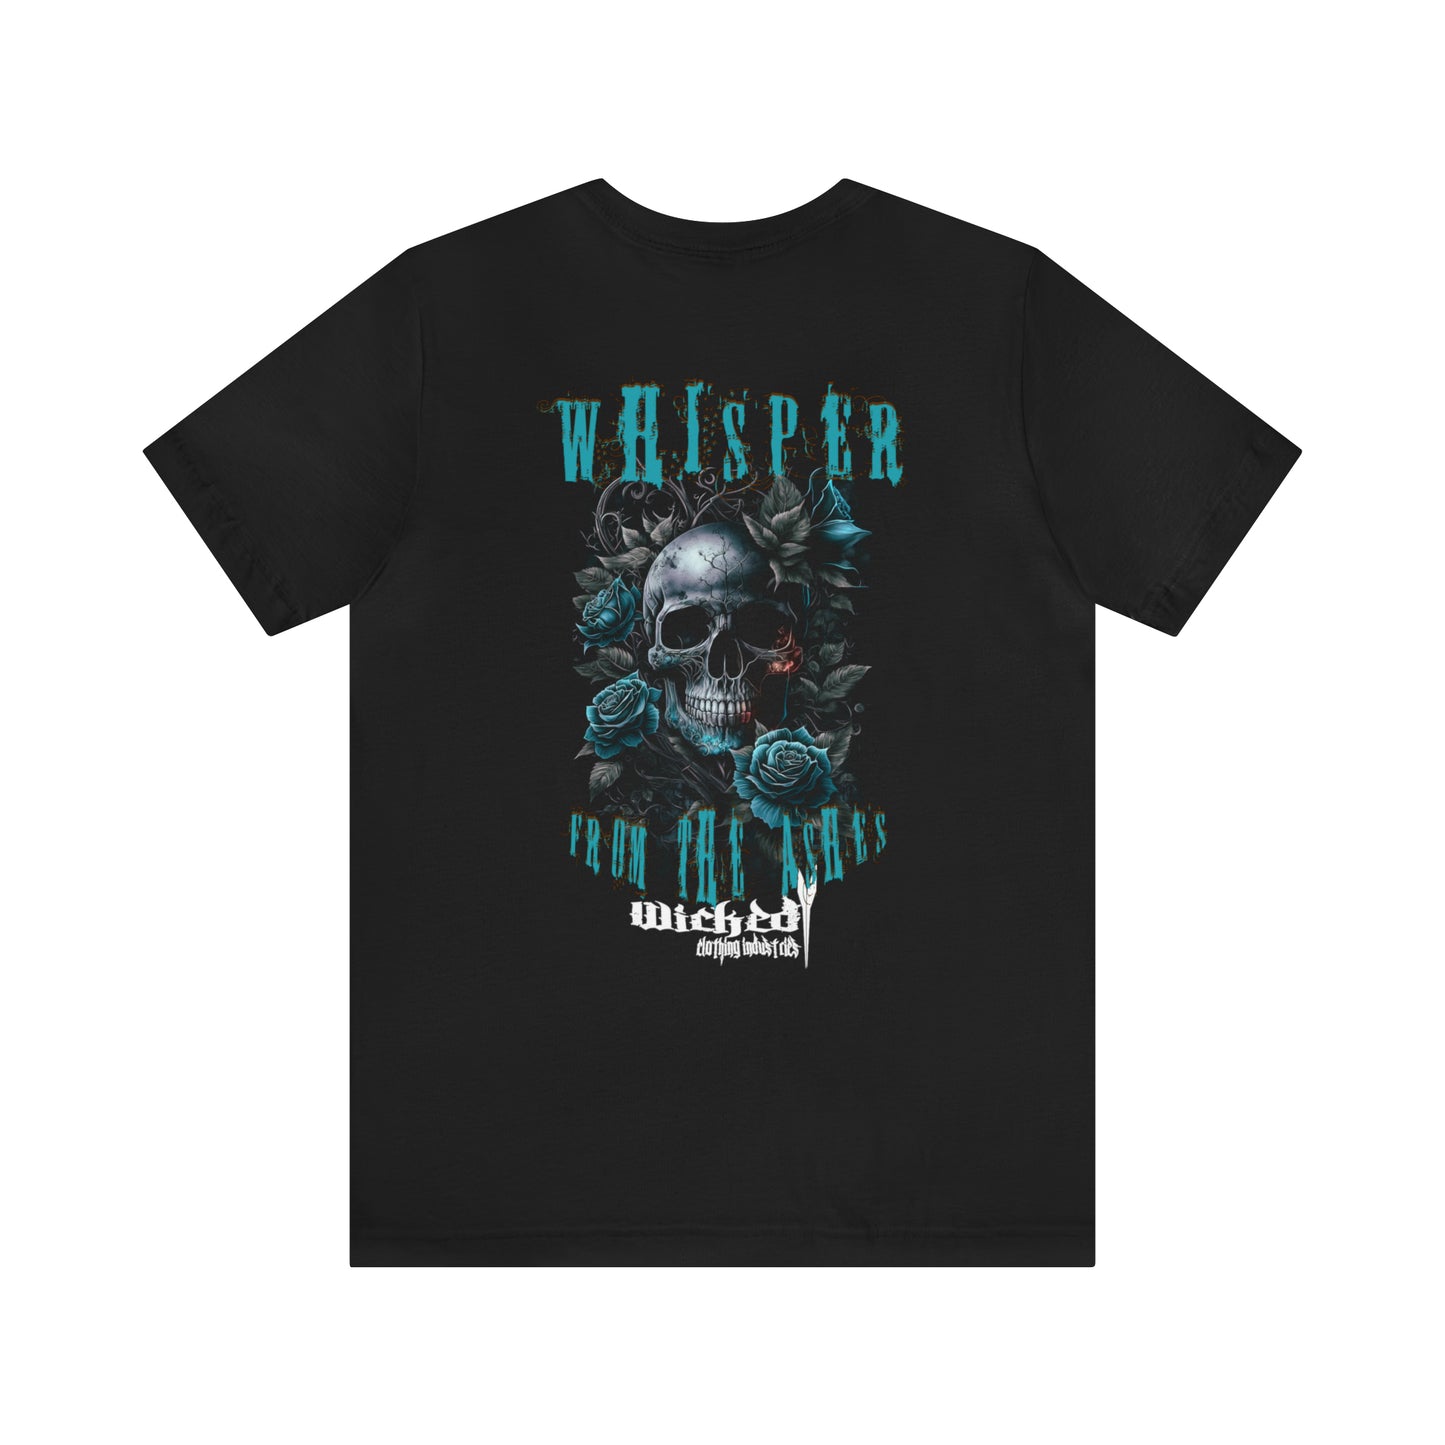 Whisper From The Ashes 2 Sided / Tee Shirt